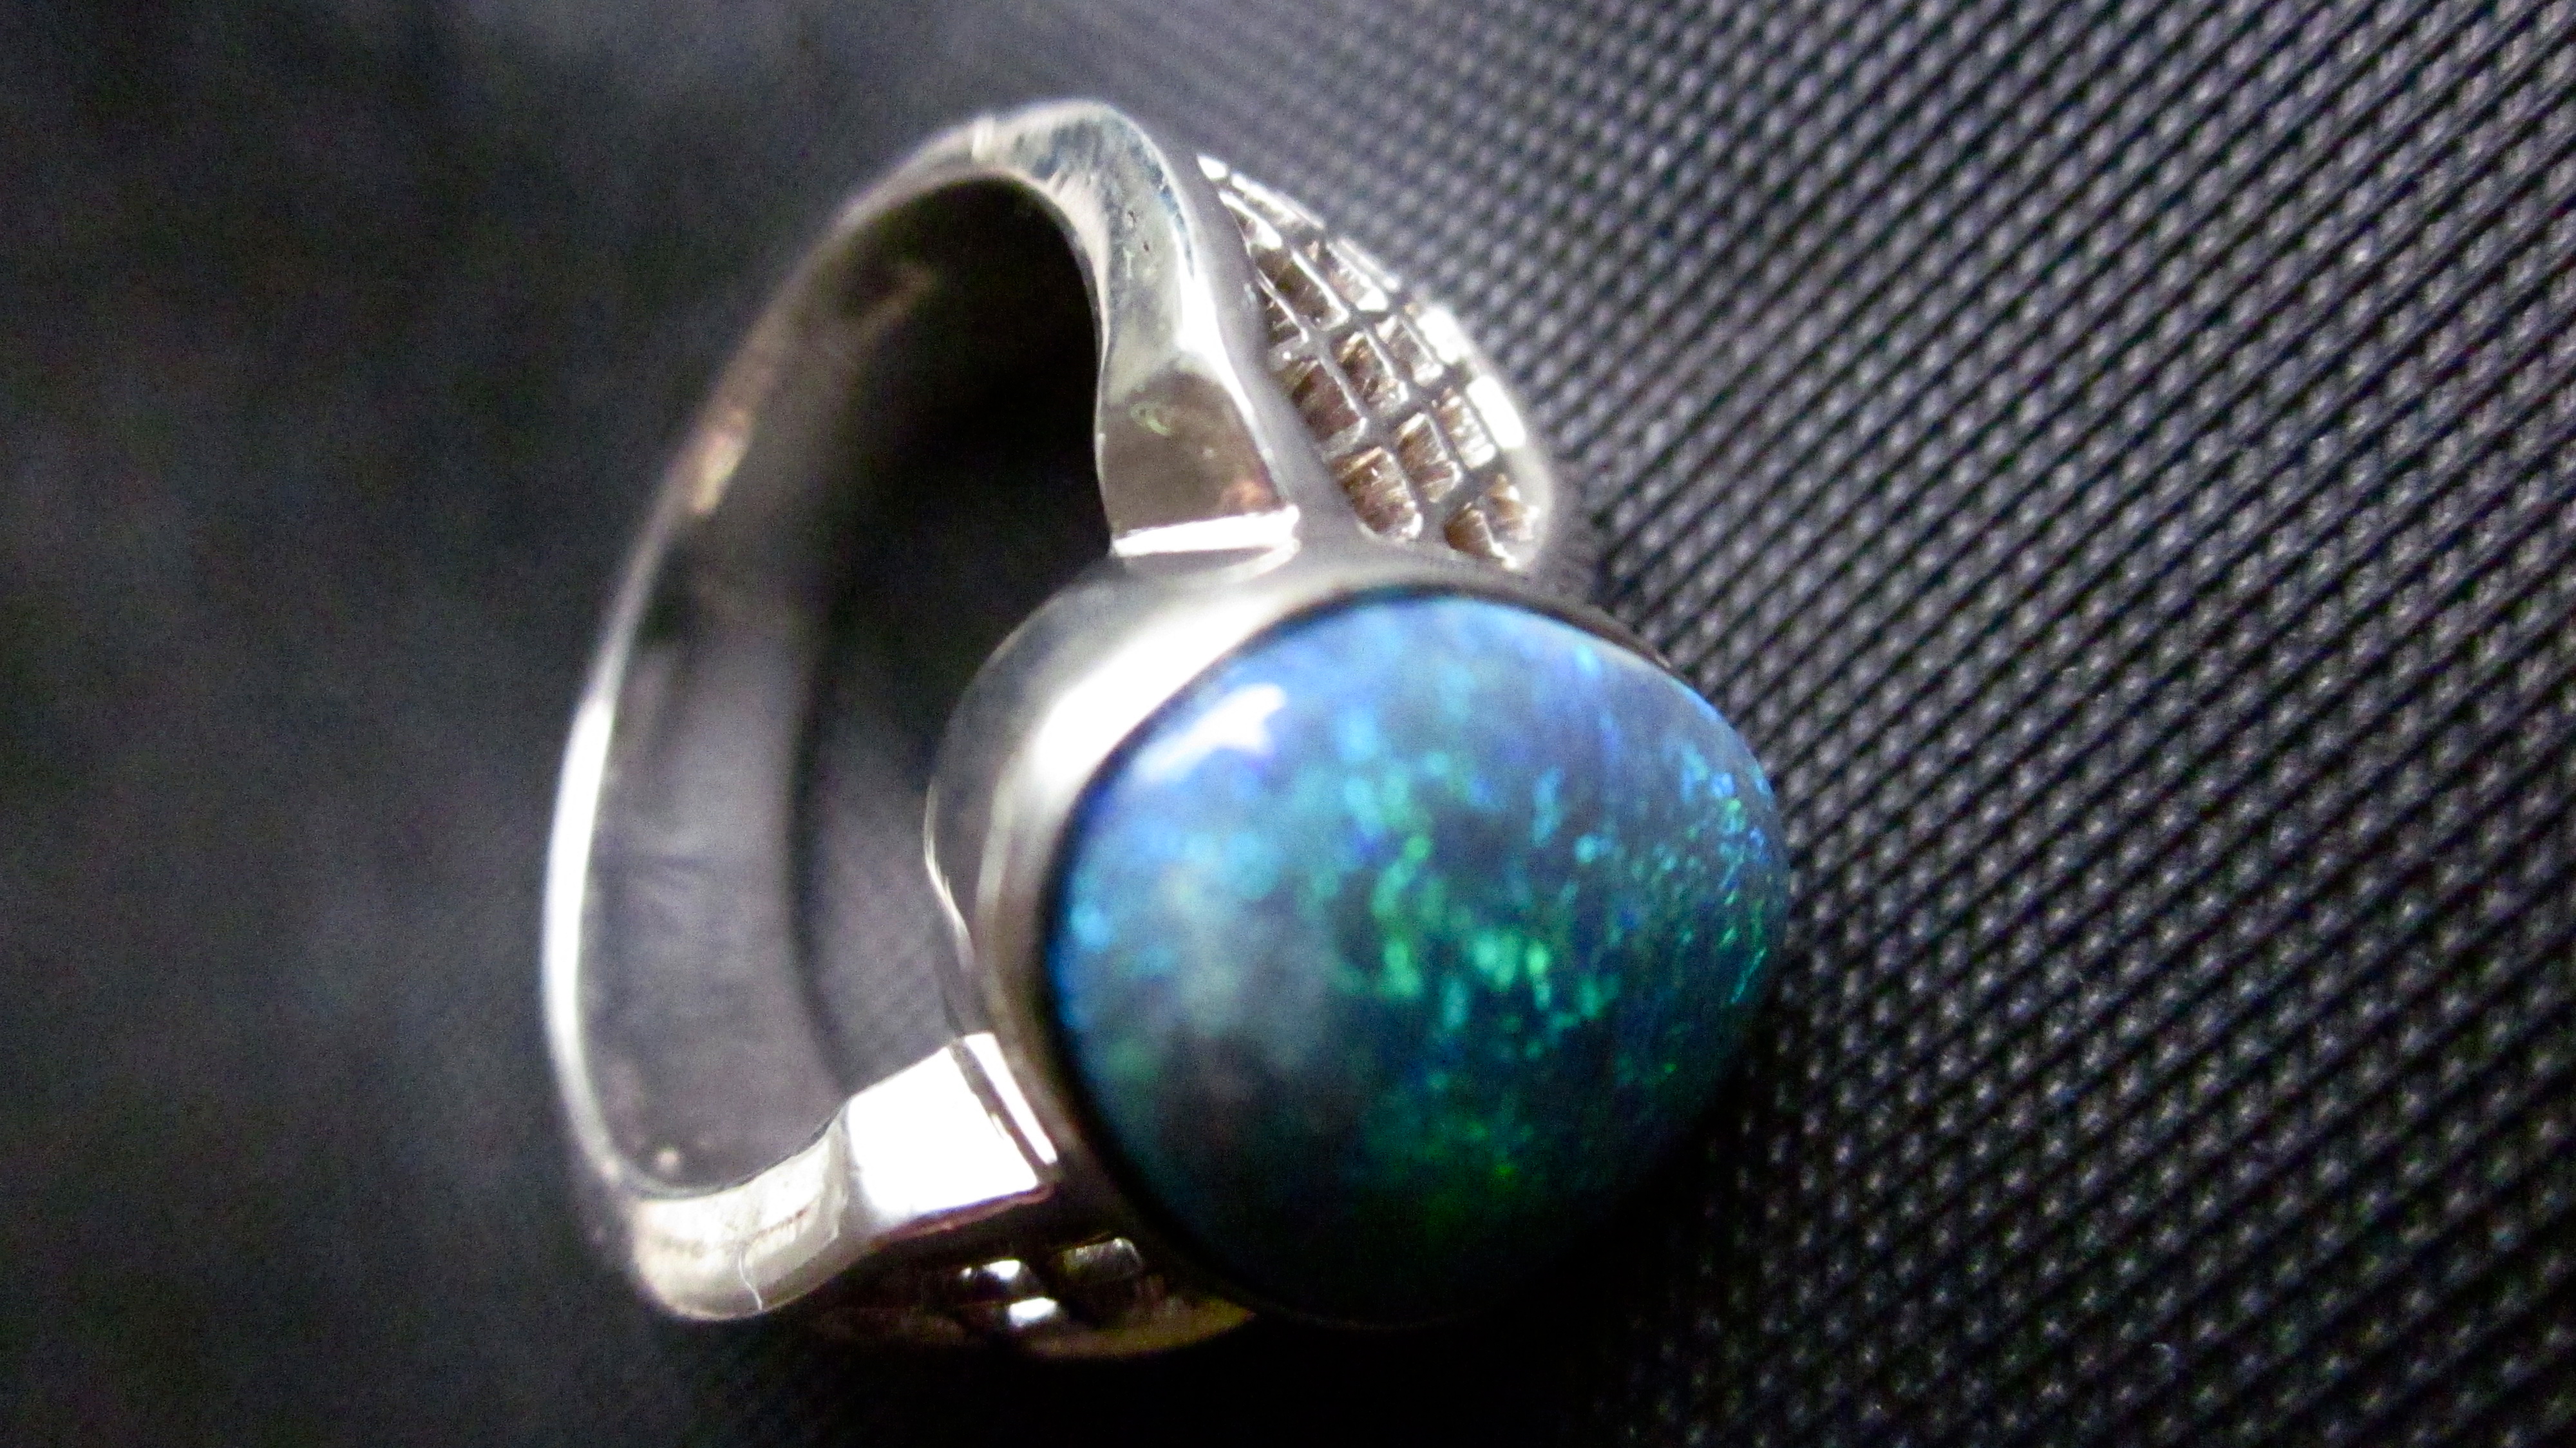 Custom mens opal rings Sale 75%Savings Off $ in your country Expensive.